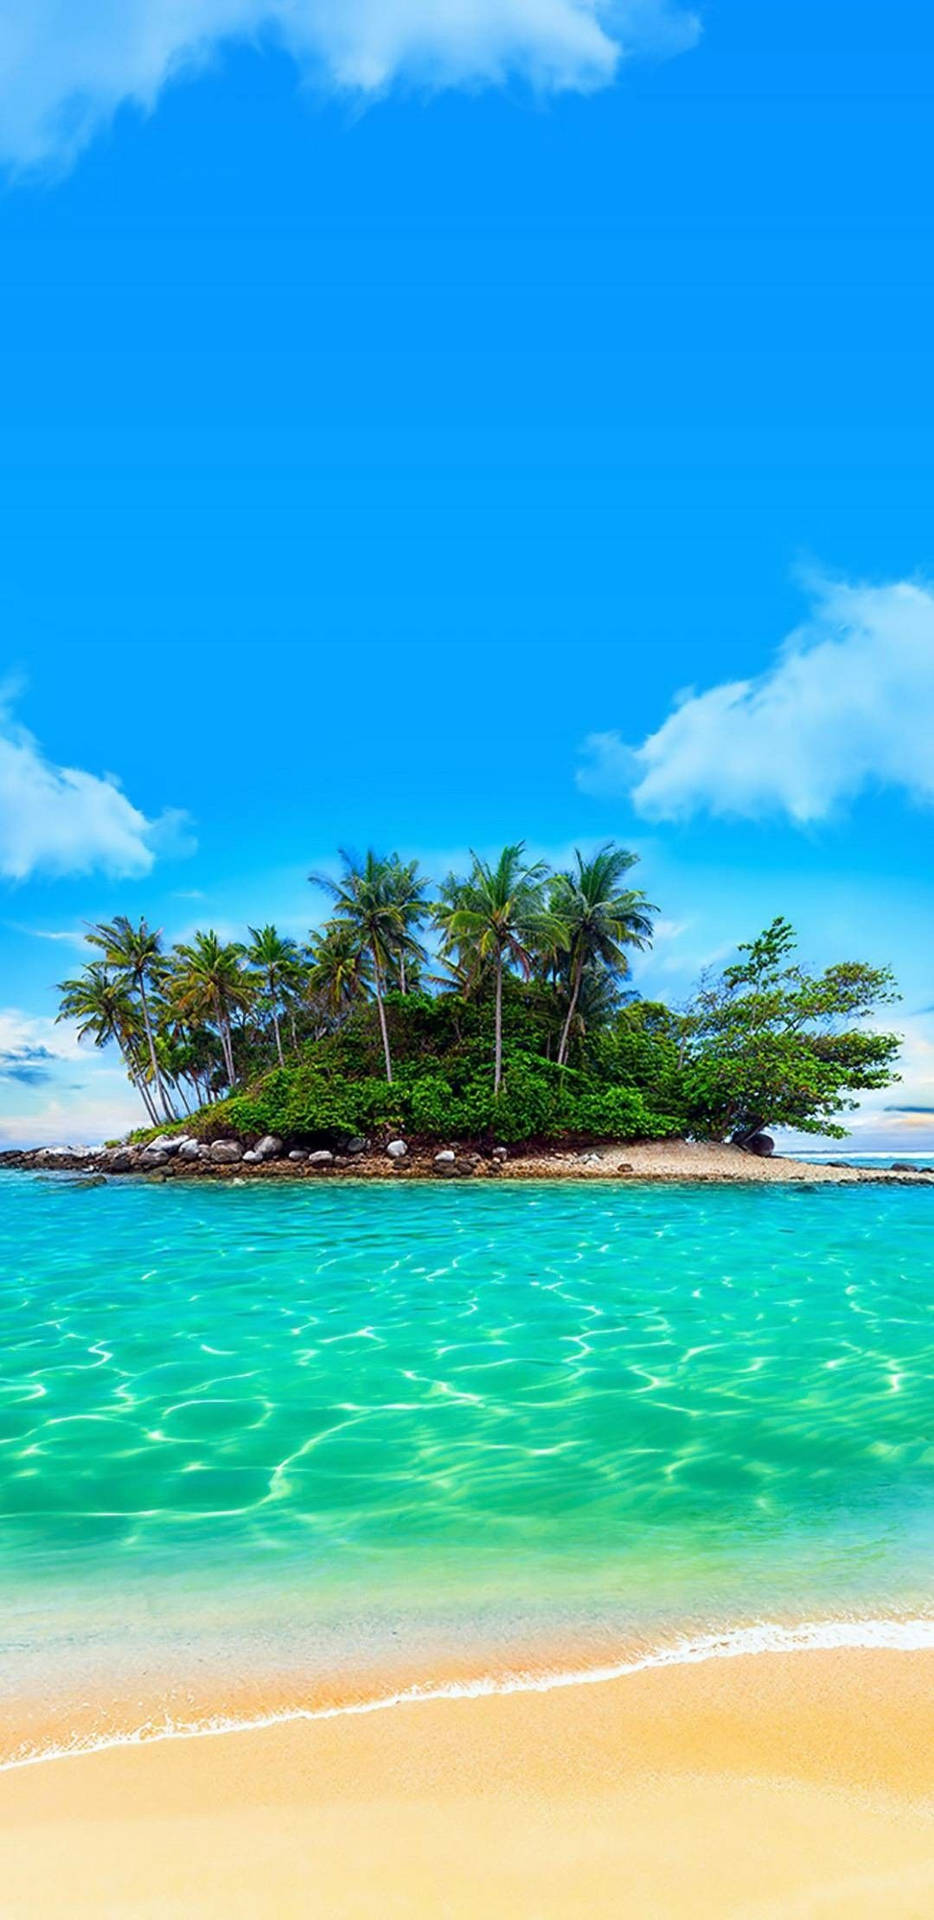 Secluded Island Background